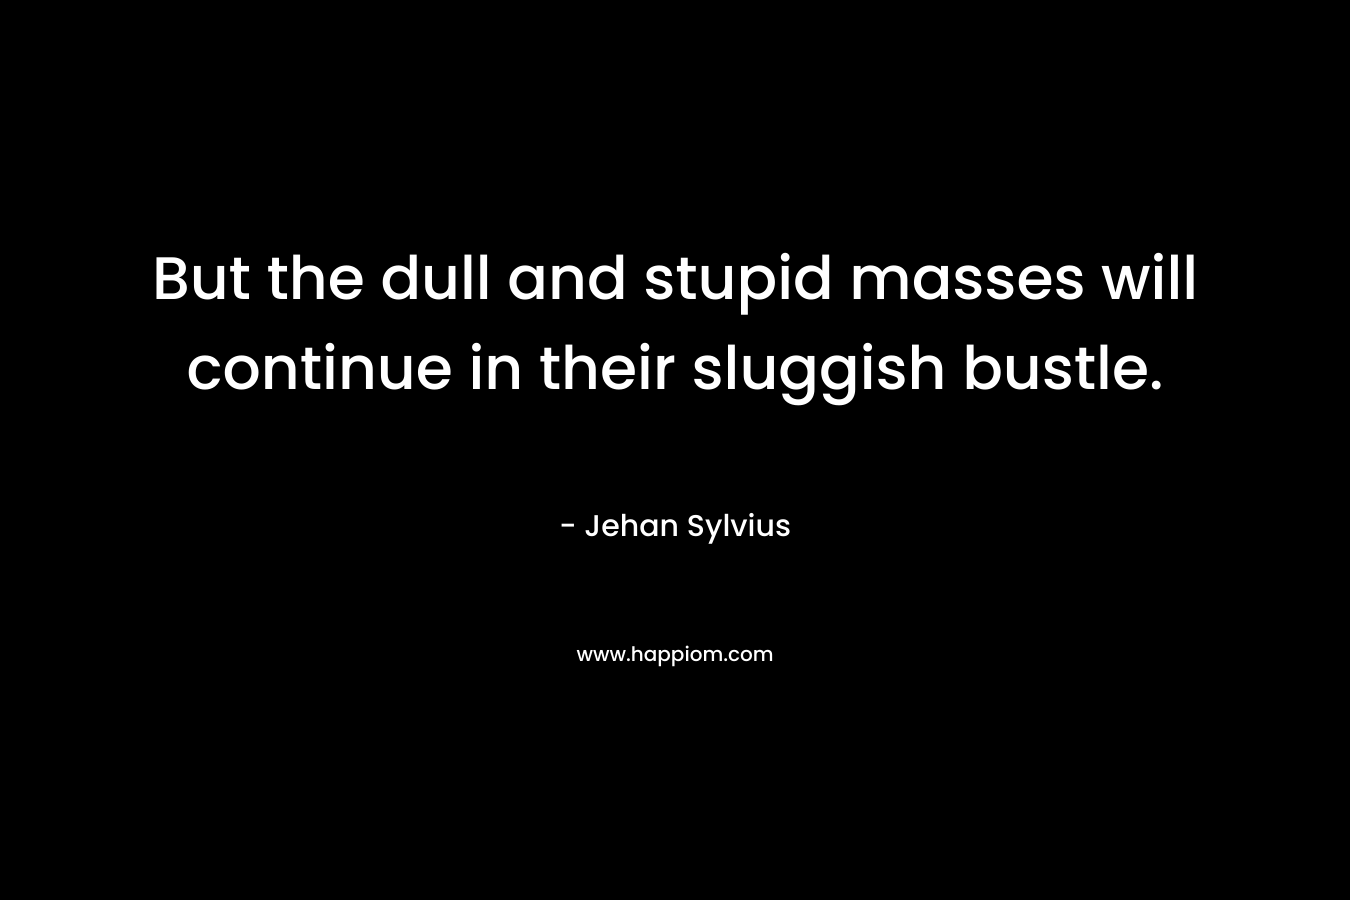 But the dull and stupid masses will continue in their sluggish bustle. – Jehan Sylvius